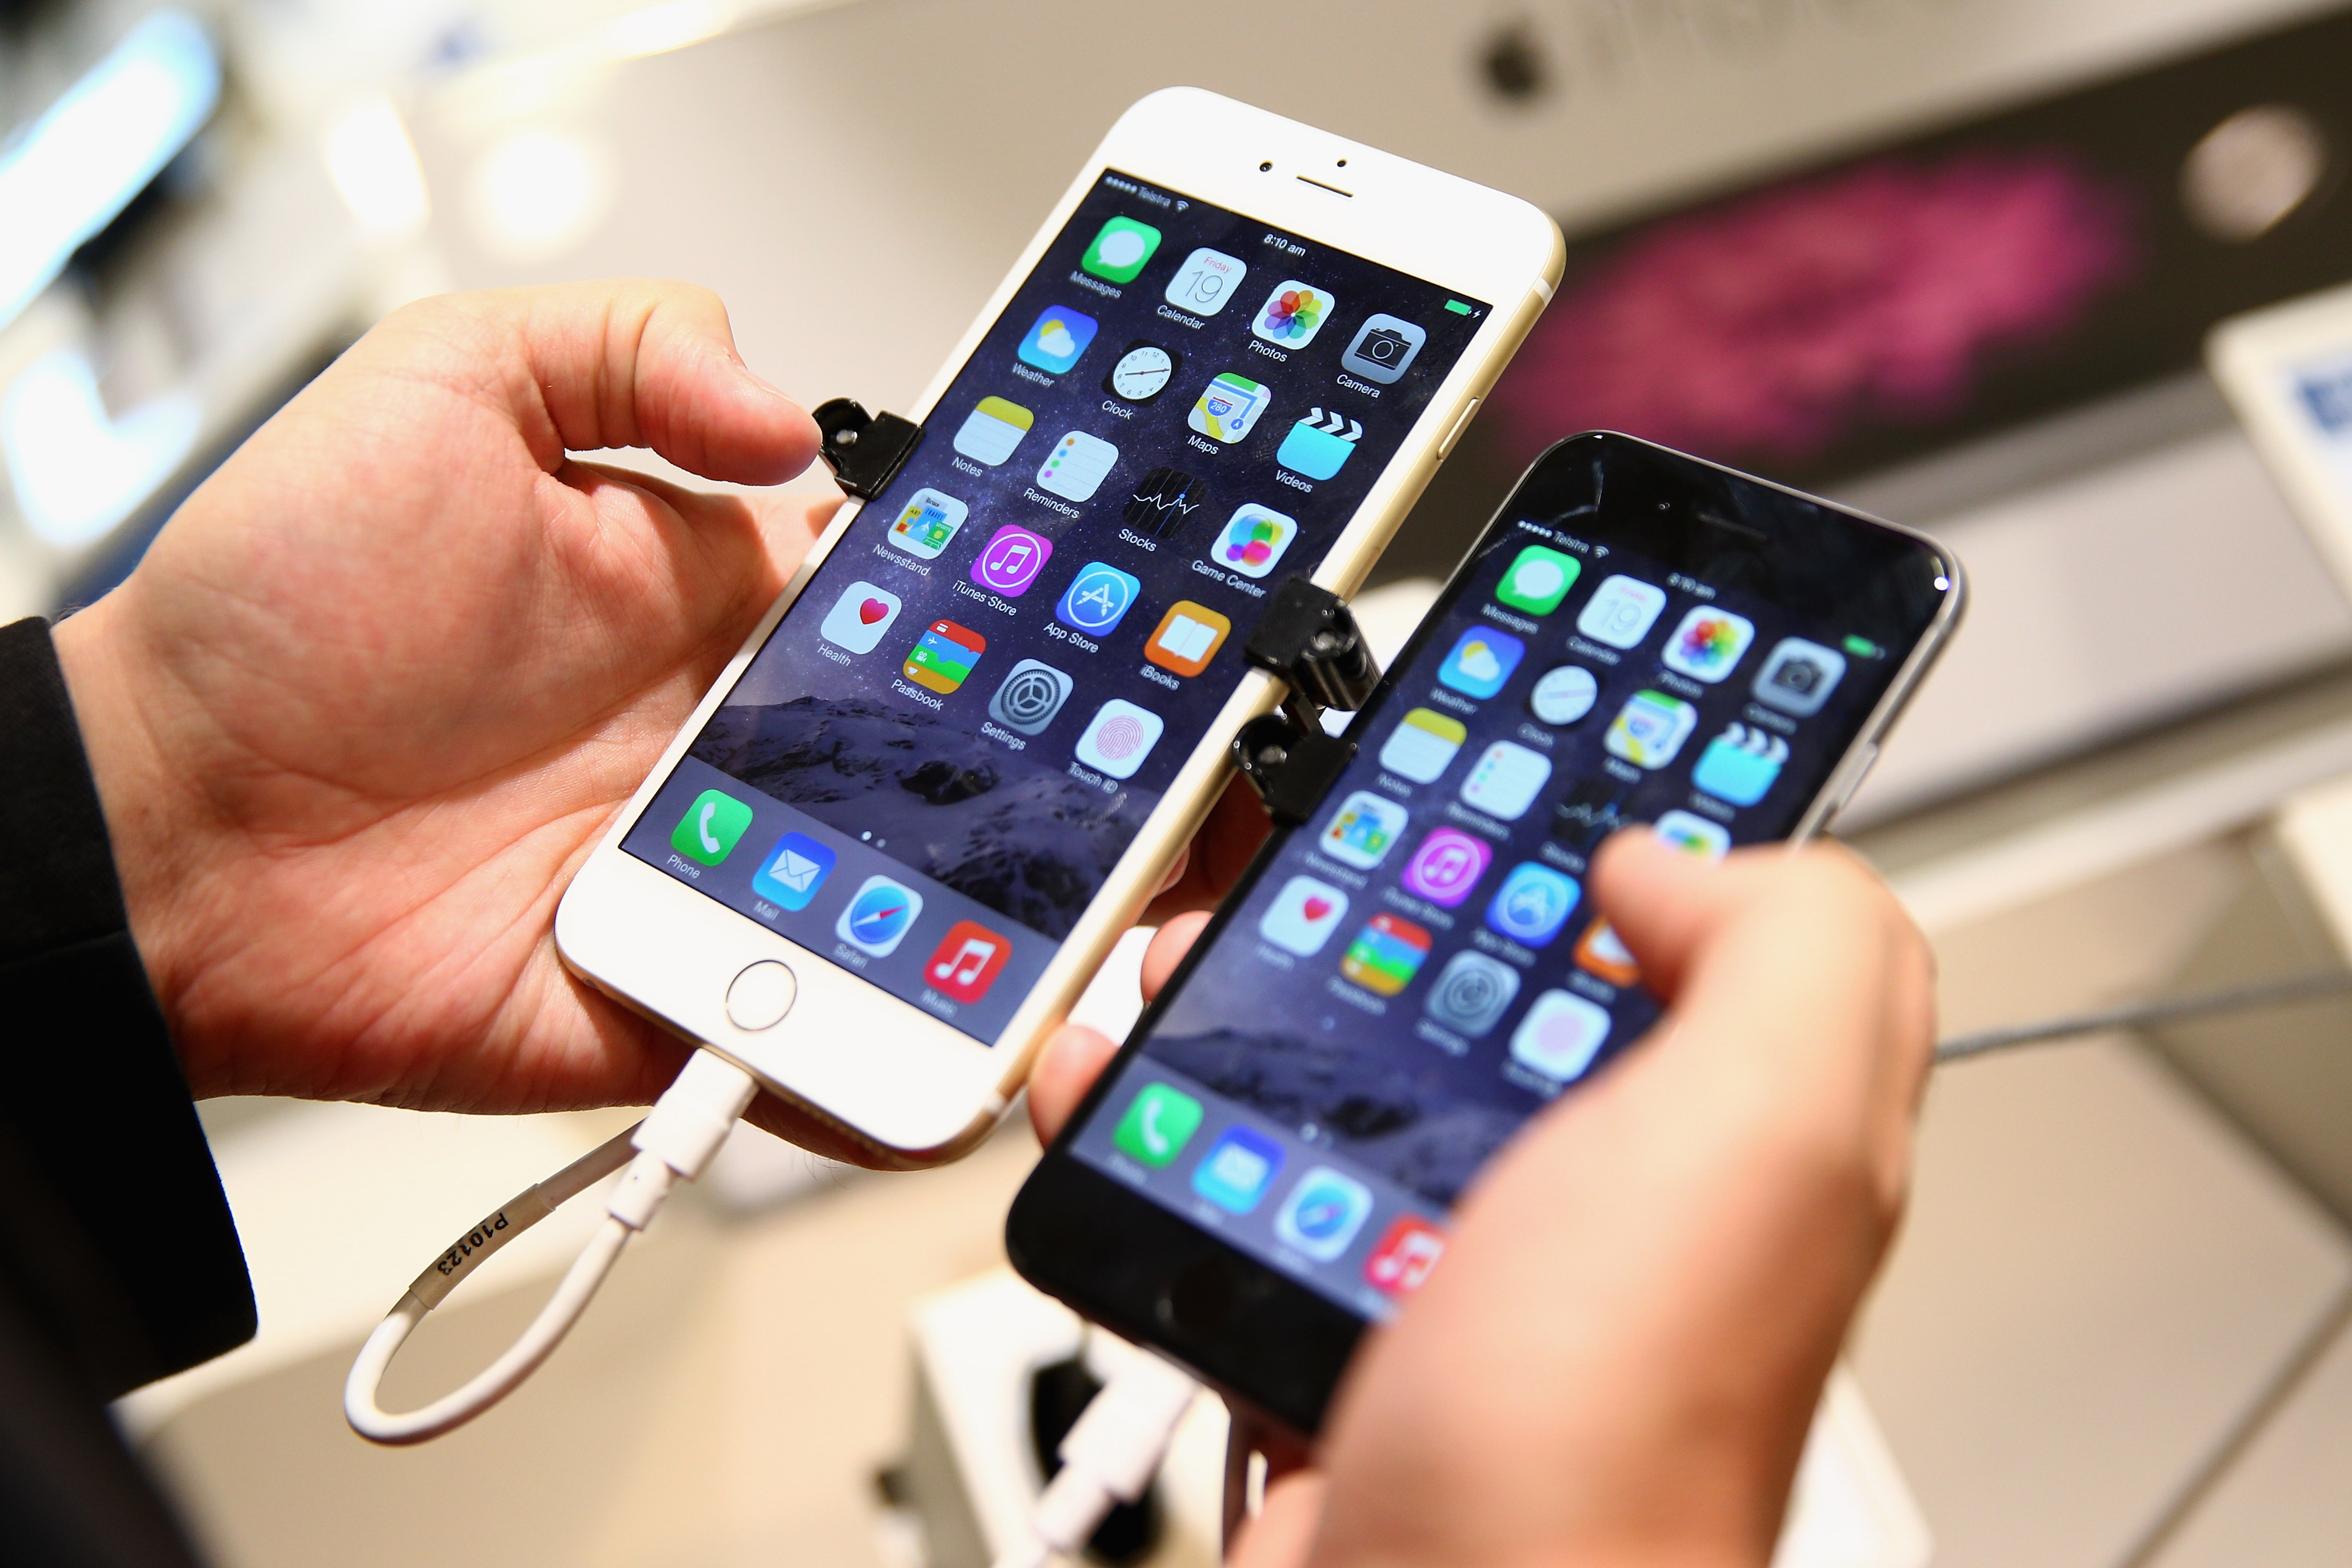 The iPhone 6 Plus and iPhone 6 are compared at a Telstra Store on September 19, 2014 in Sydney, Australia. (Cameron Spencer&mdash;Getty Images)